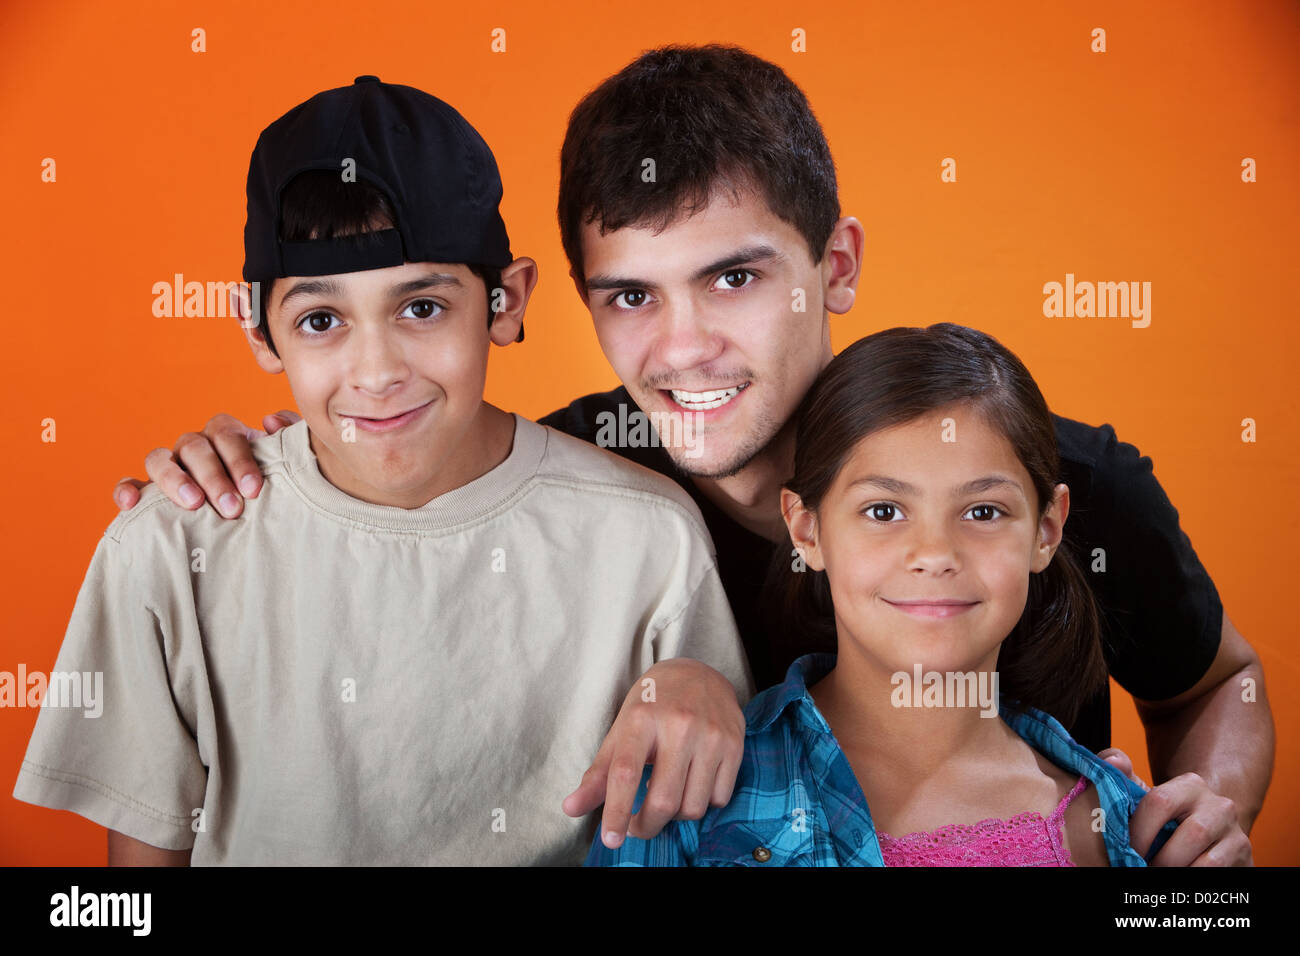 Smiling brothers and sister on an orange background Stock Photo